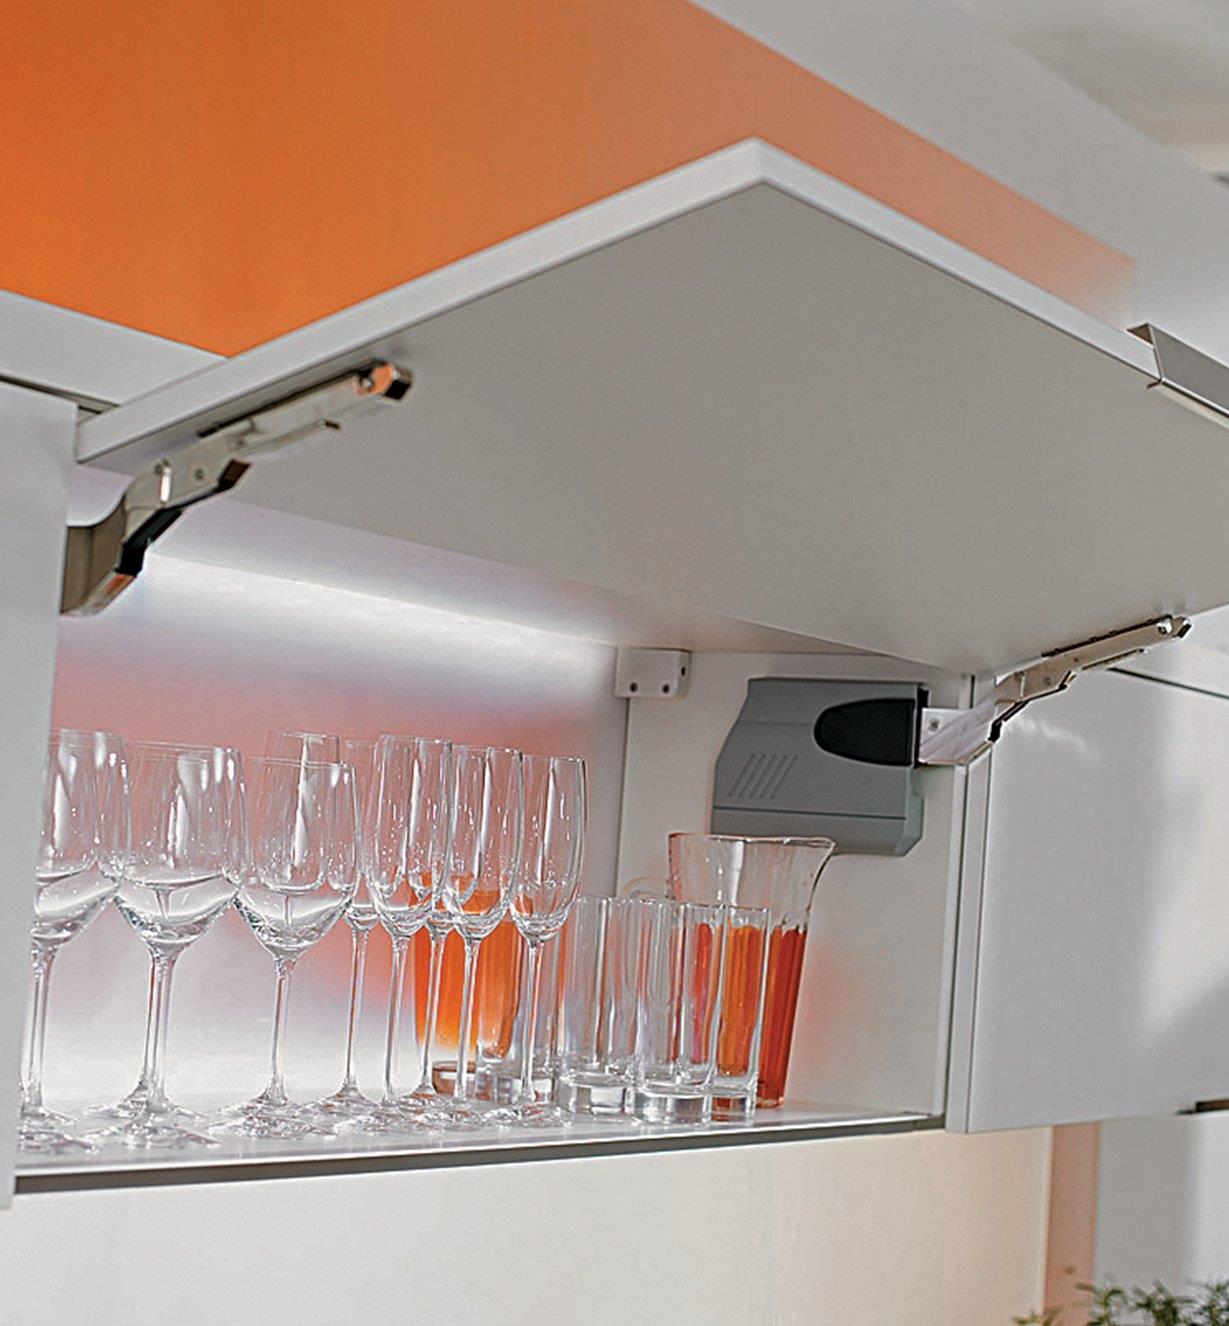 Example of overhead cabinet made with Blum Aventos HK Soft-Close Lift System